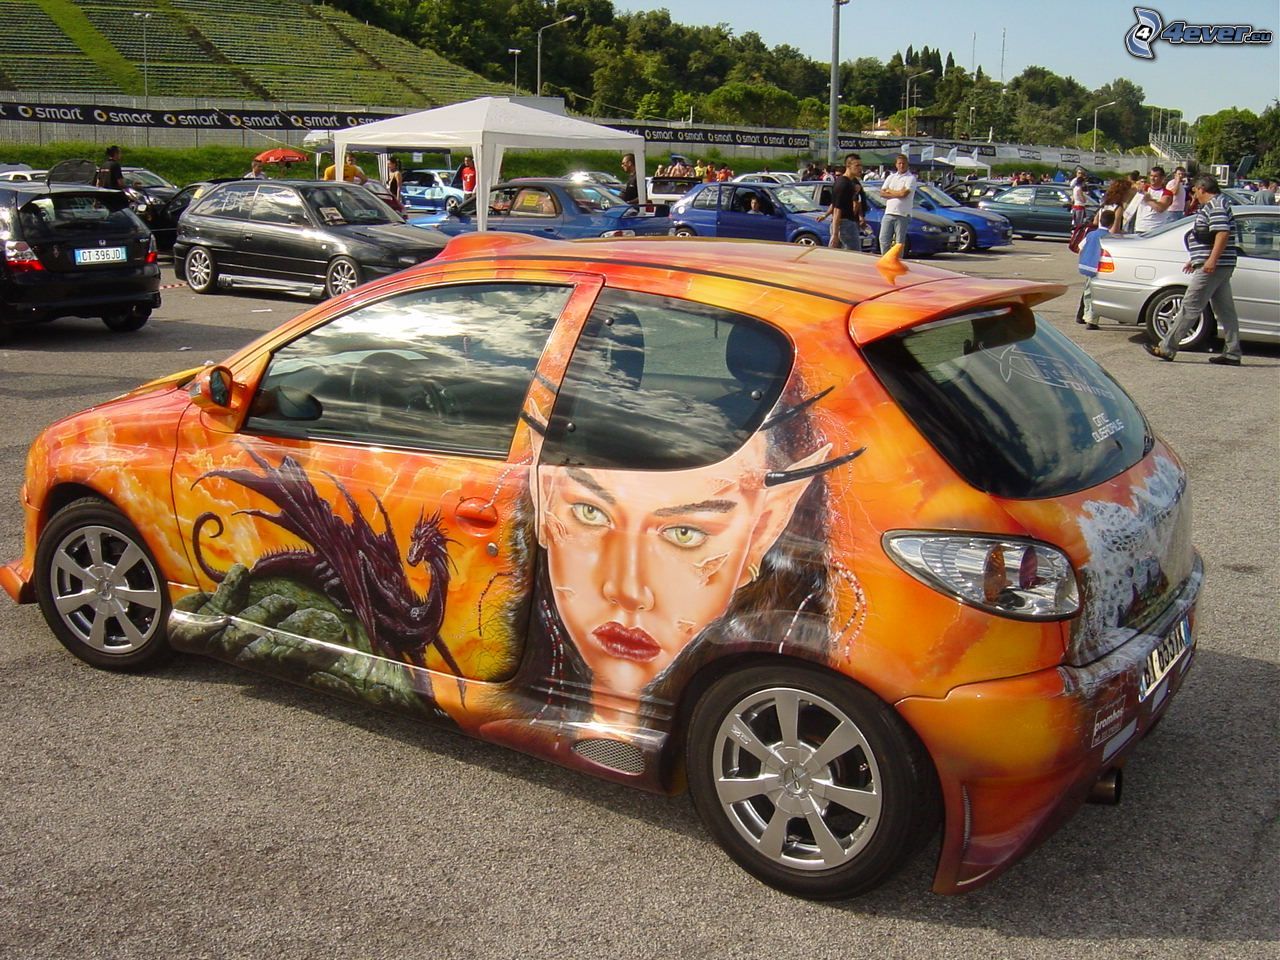 http://pictures.4ever.eu/data/download/cars/tuning/peugeot-206,-tuning-125153.jpg?no-logo